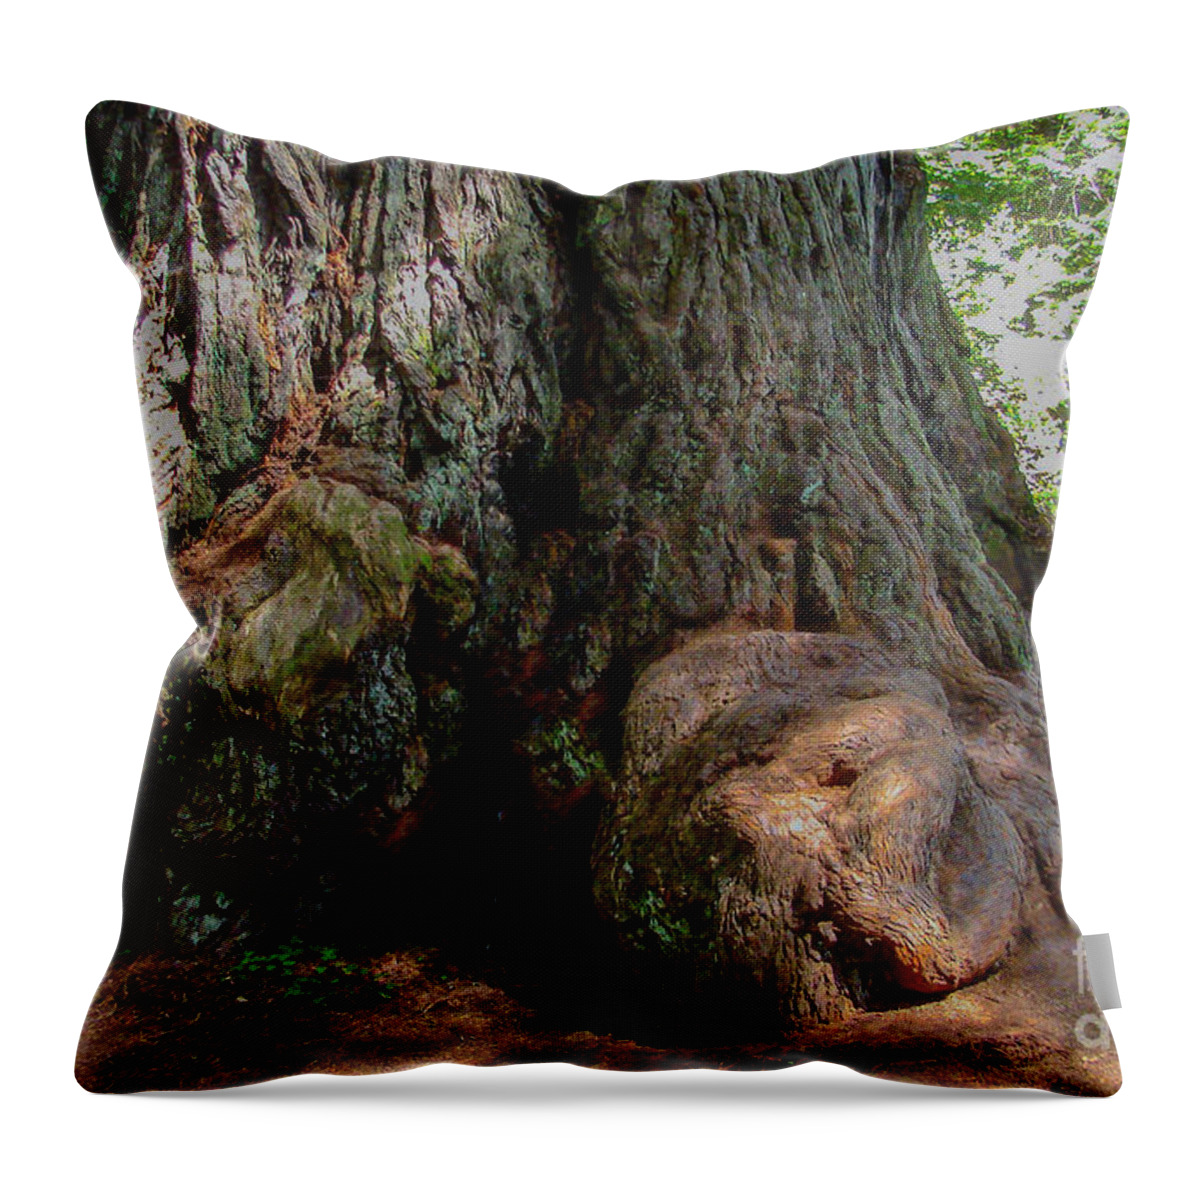 Redwood In Sequoia National Forest Throw Pillow featuring the digital art Redwood in Sequoia National Forest by Tammy Keyes